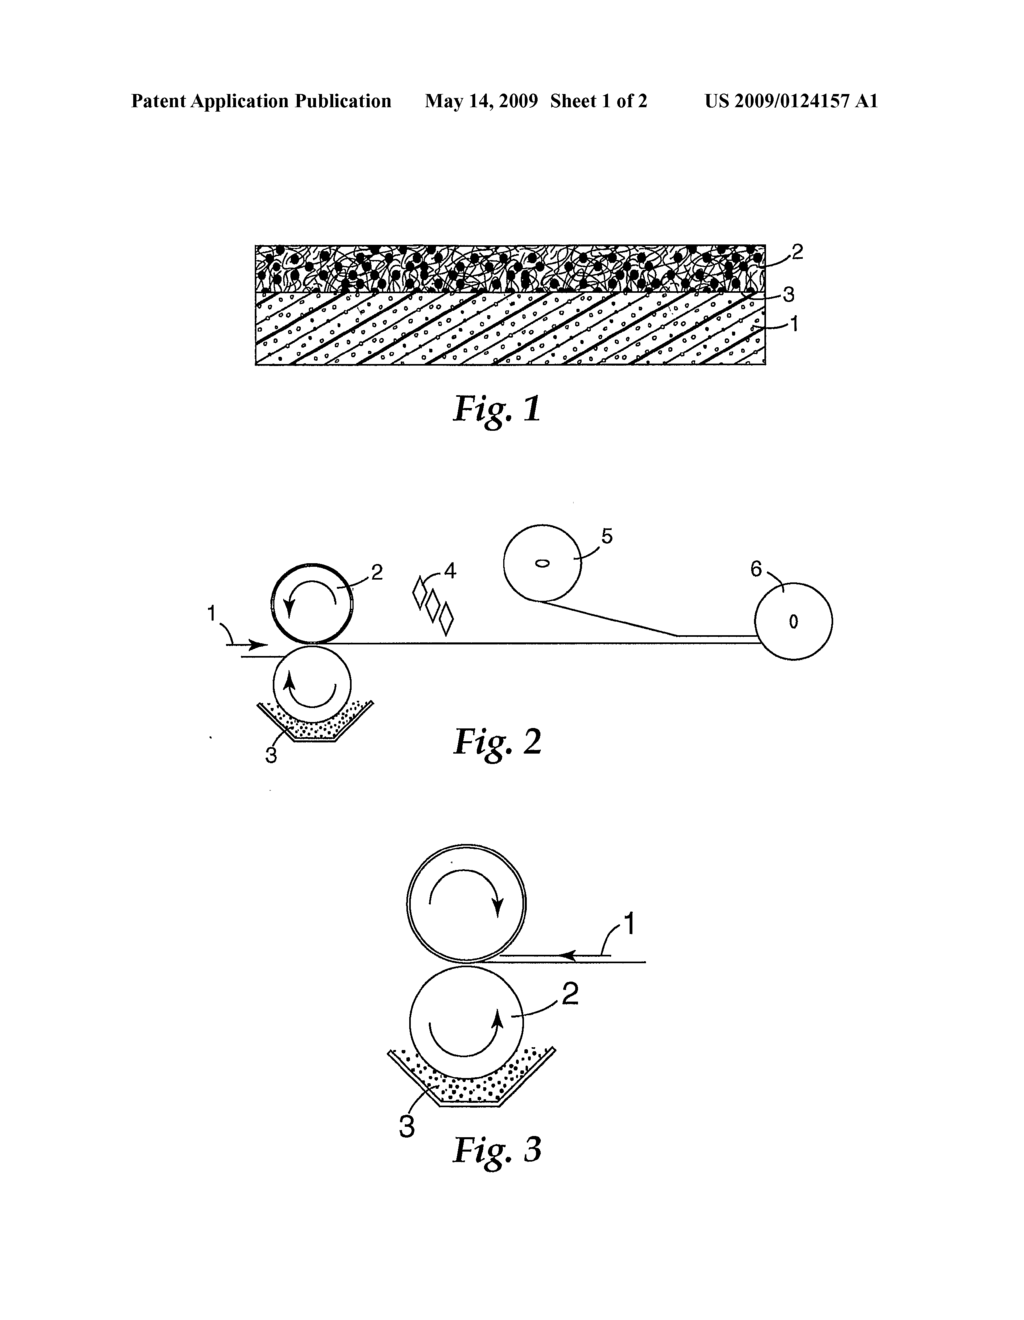 ABRASIVE CLEANING ITEM CONTAINING AN AGENT WHICH PROMOTES THE CREATION OF FOAM WHEN IN CONTACT WITH WATER TO TREAT SURFACES - diagram, schematic, and image 02